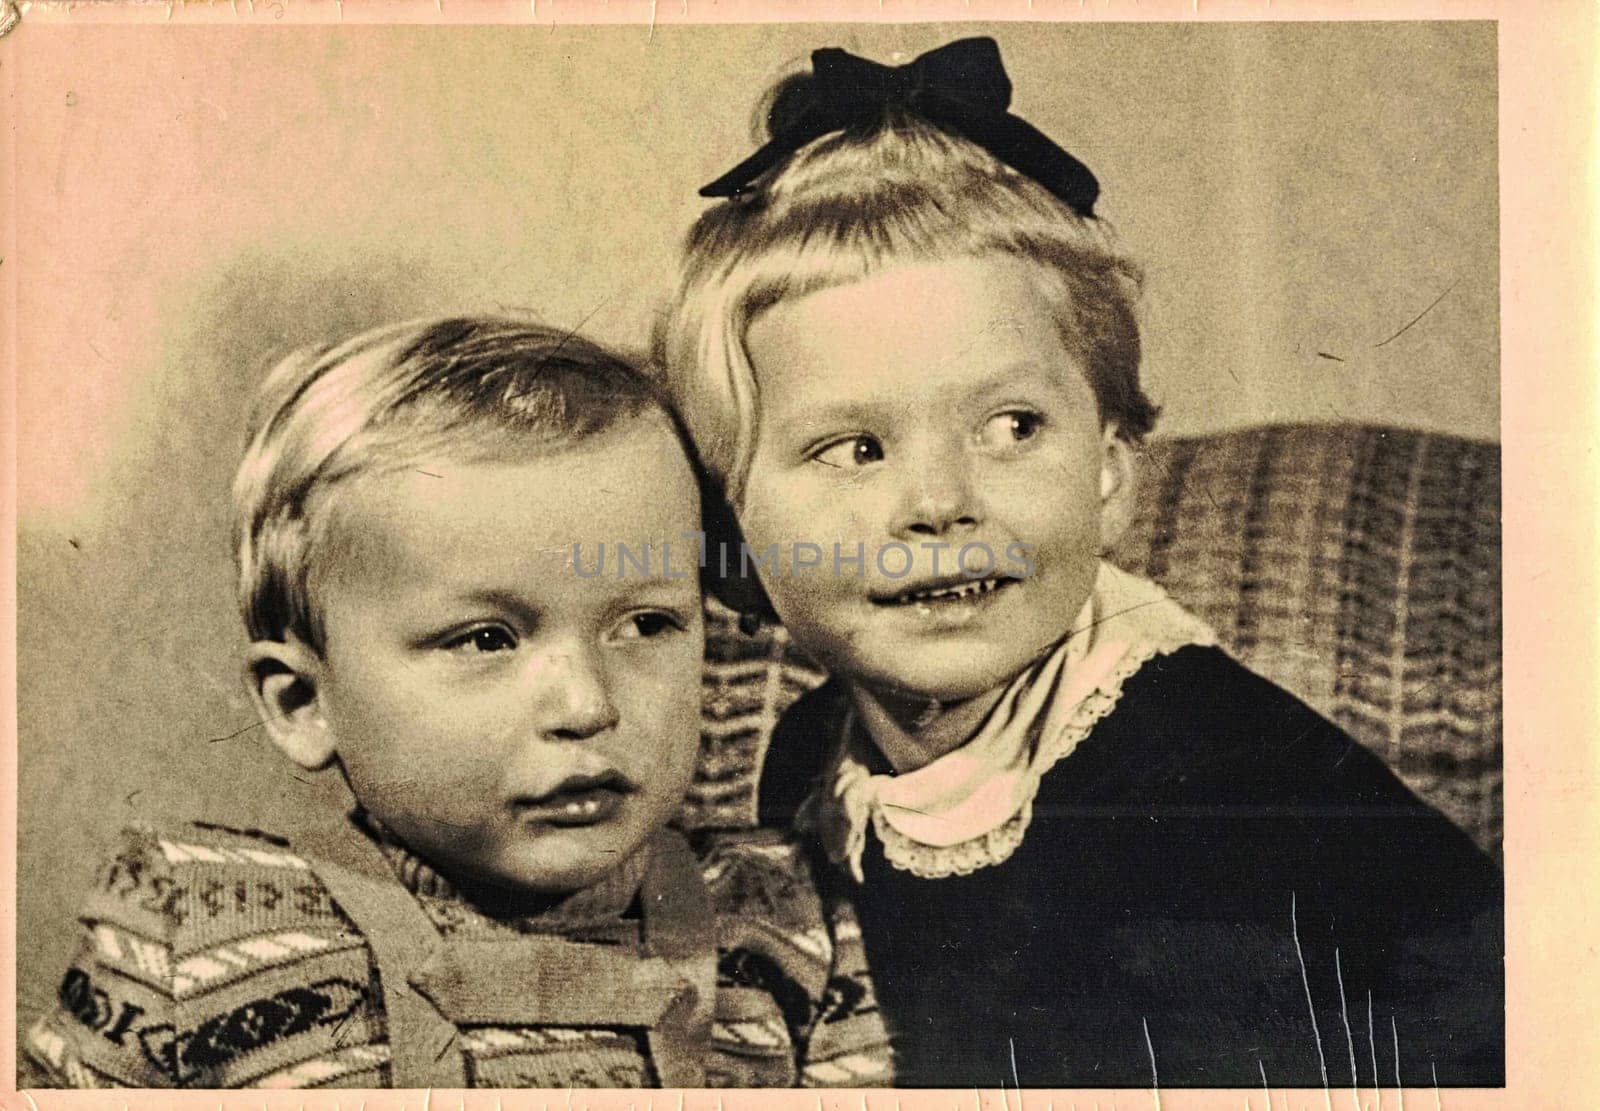 GERMANY - CIRCA 1930s: Vintage photo shows two small children - siblings - brother and sister. About two and four years old.